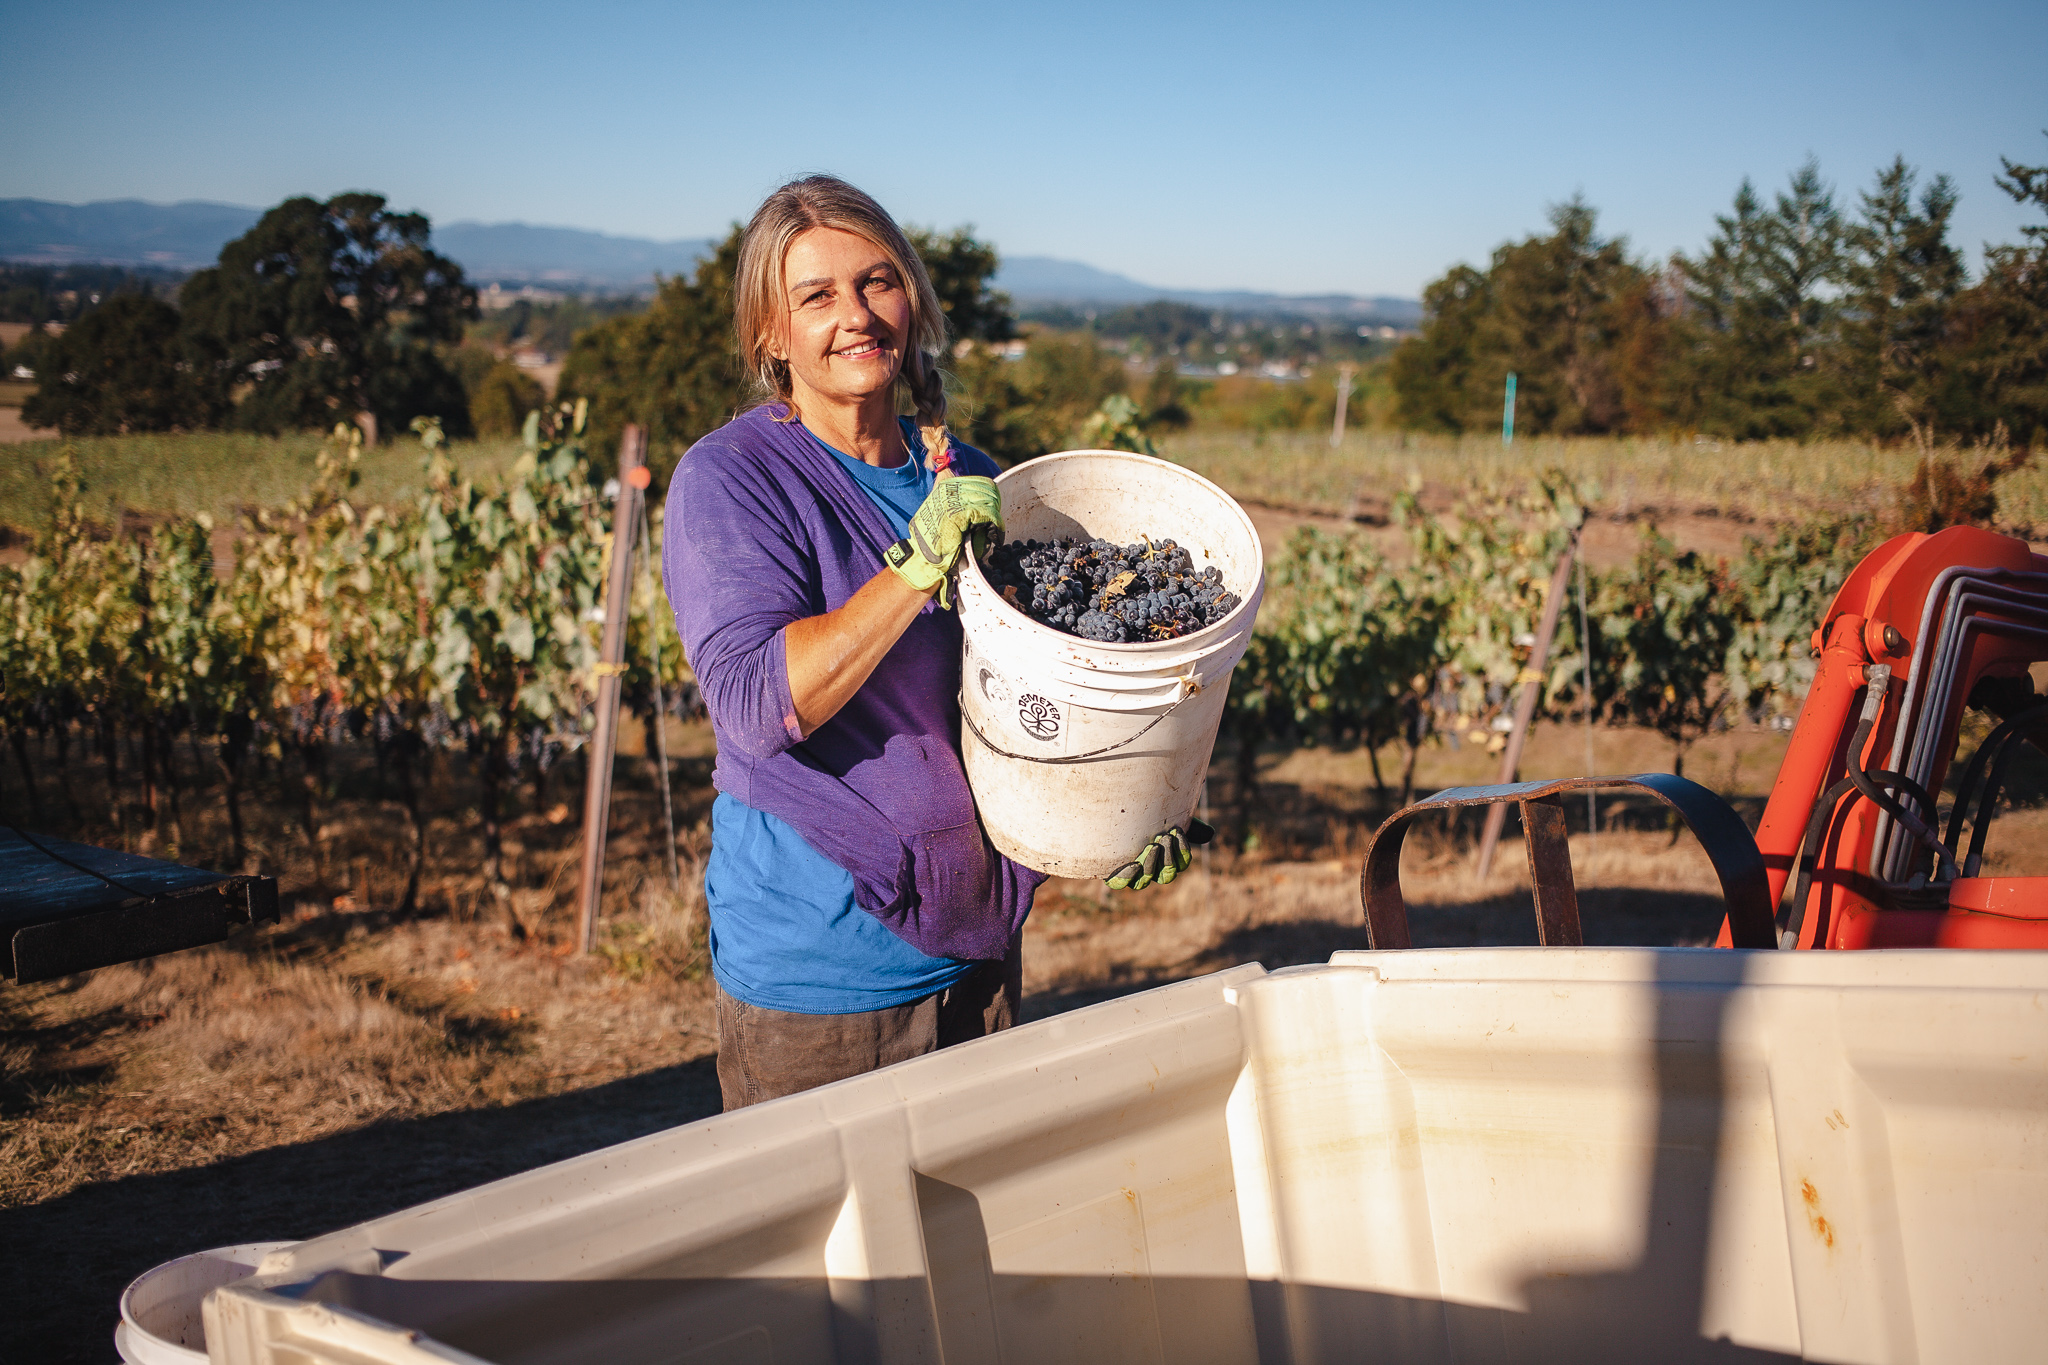 Woman transporting harvested grapes from the bucket to the container